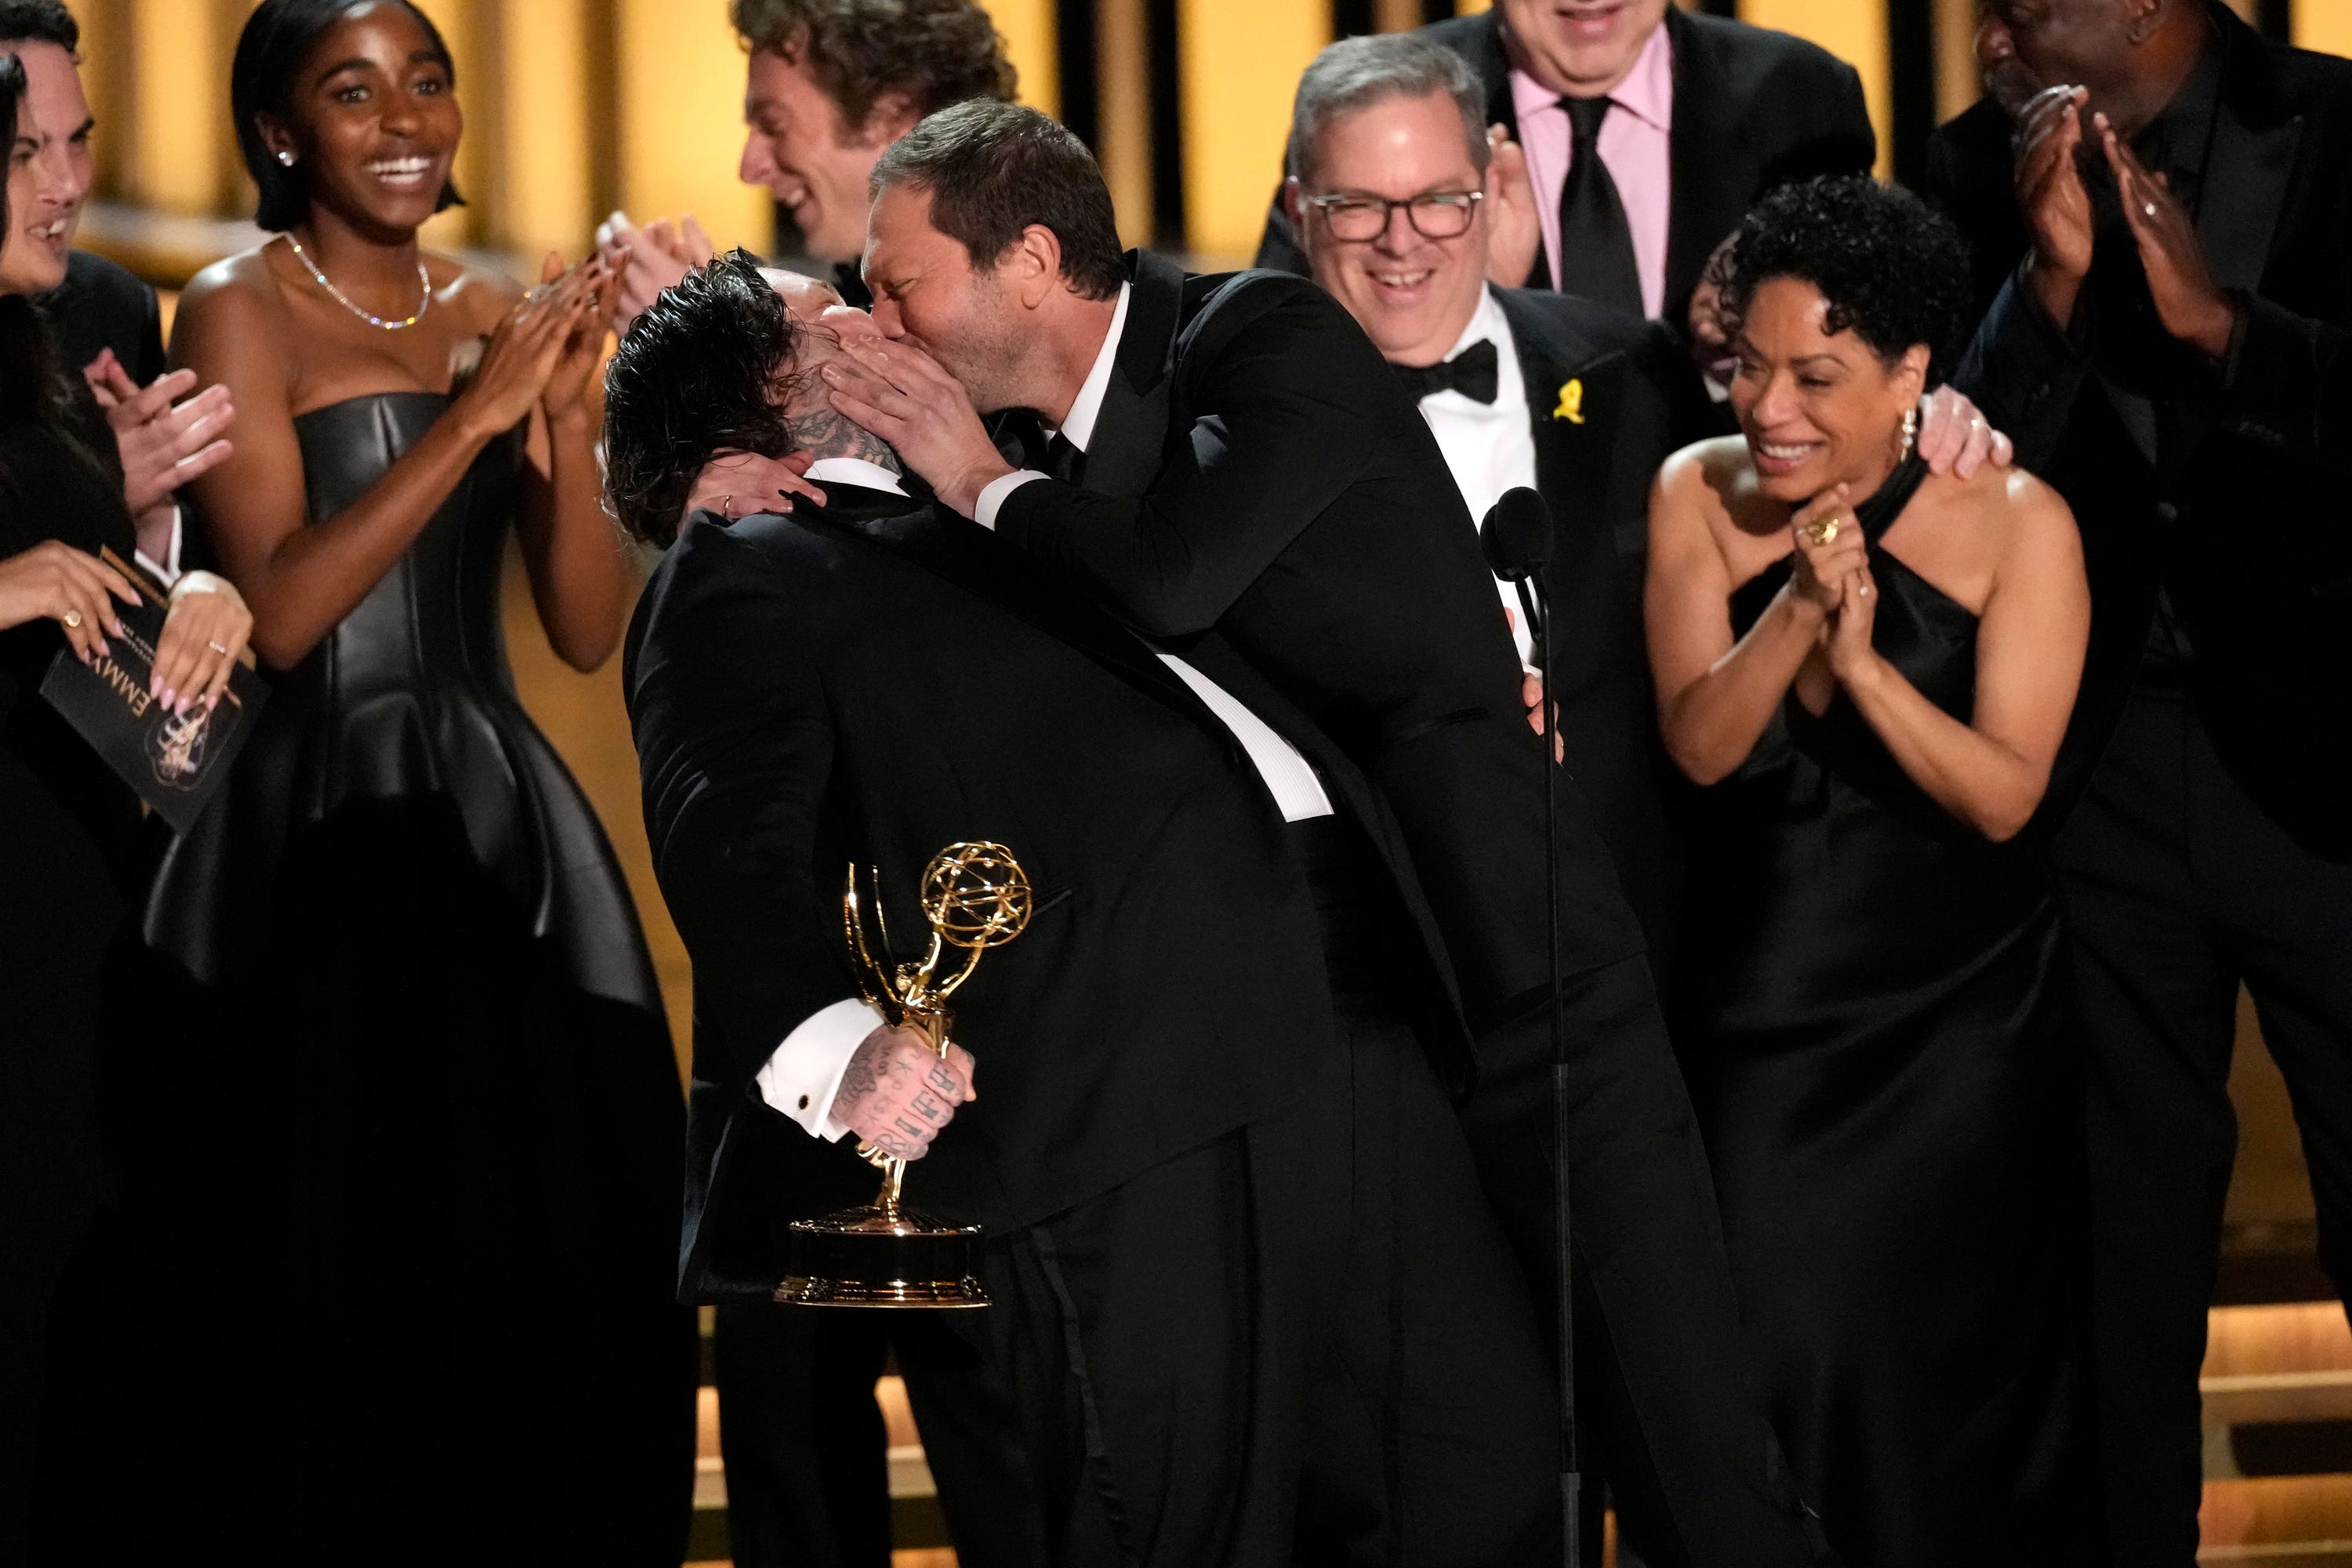 Matty Matheson, centre, and Ebon Moss-Bachrach kiss as The Bear wins the award for outstanding comedy series during the 75th Primetime Emmy Awards.